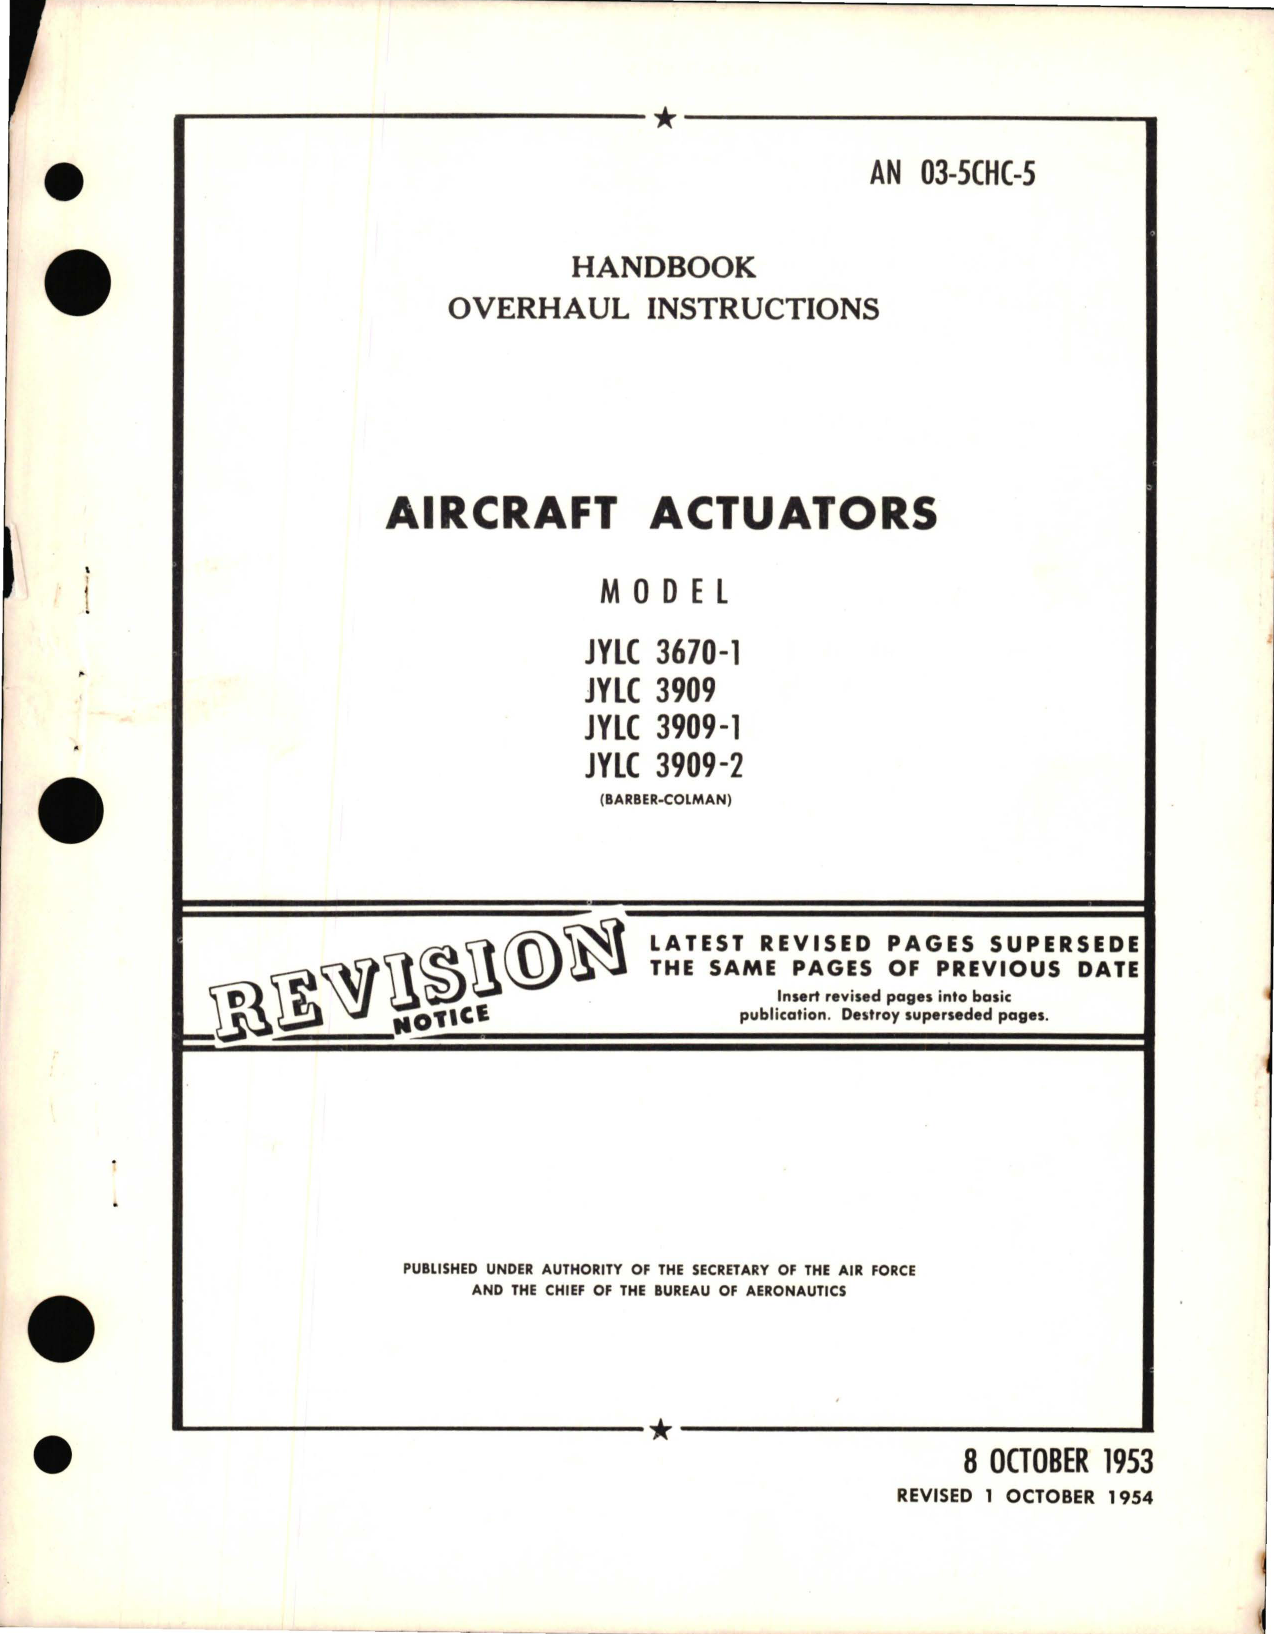 Sample page 1 from AirCorps Library document: Overhaul Instructions for Aircraft Actuators